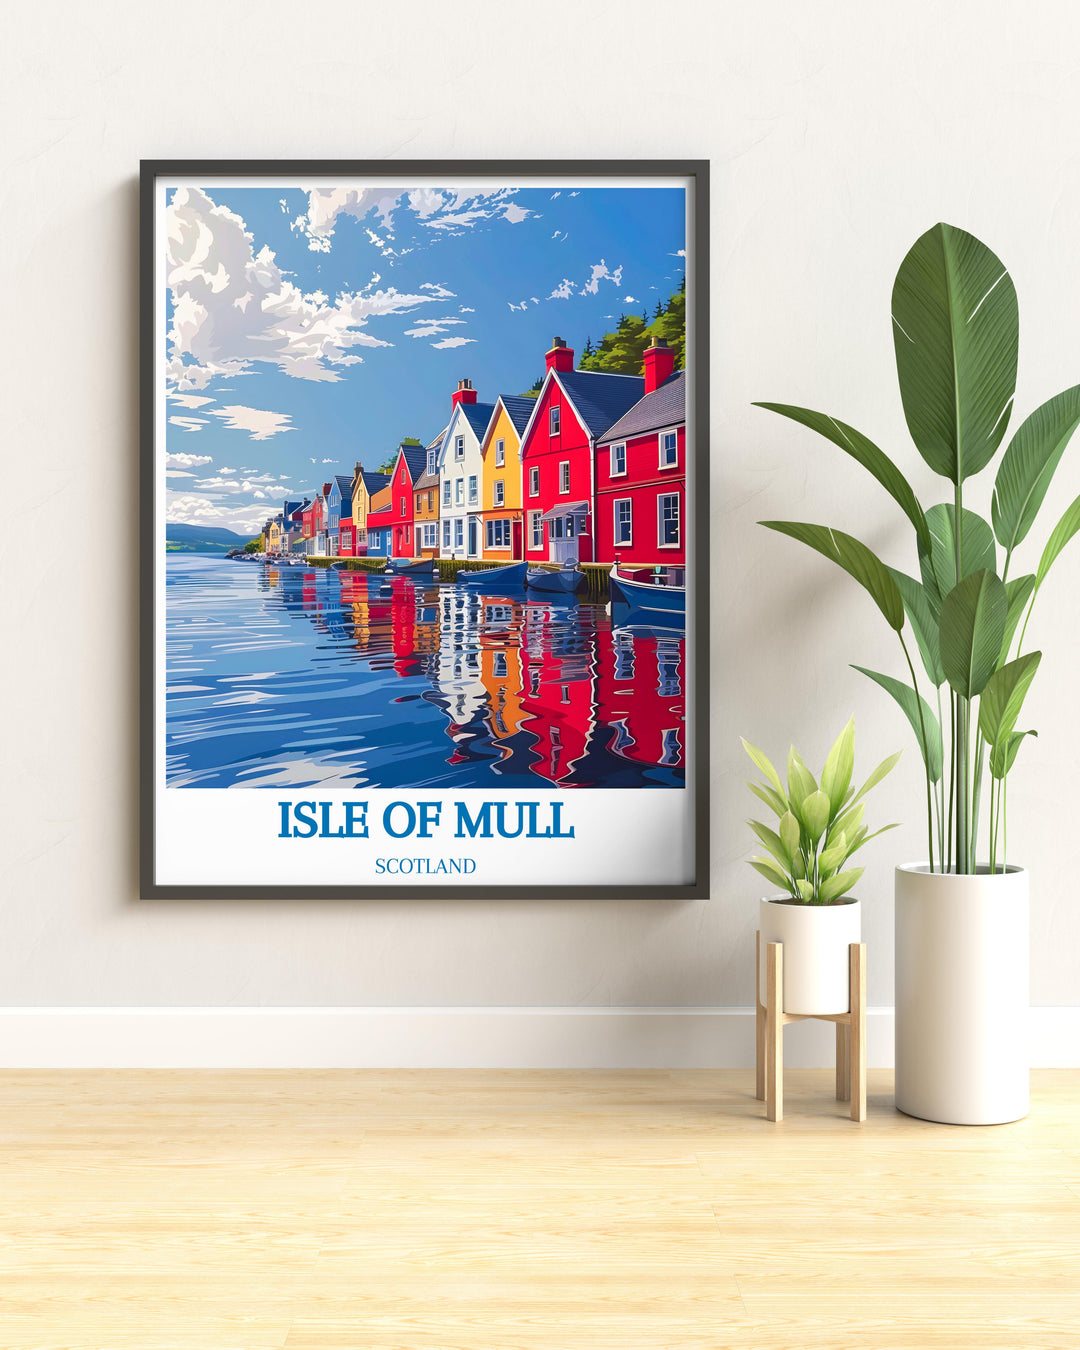 Artistic representation of Tobermory Harbour focusing on the bustling marina and traditional Scottish boats perfect for maritime art collectors